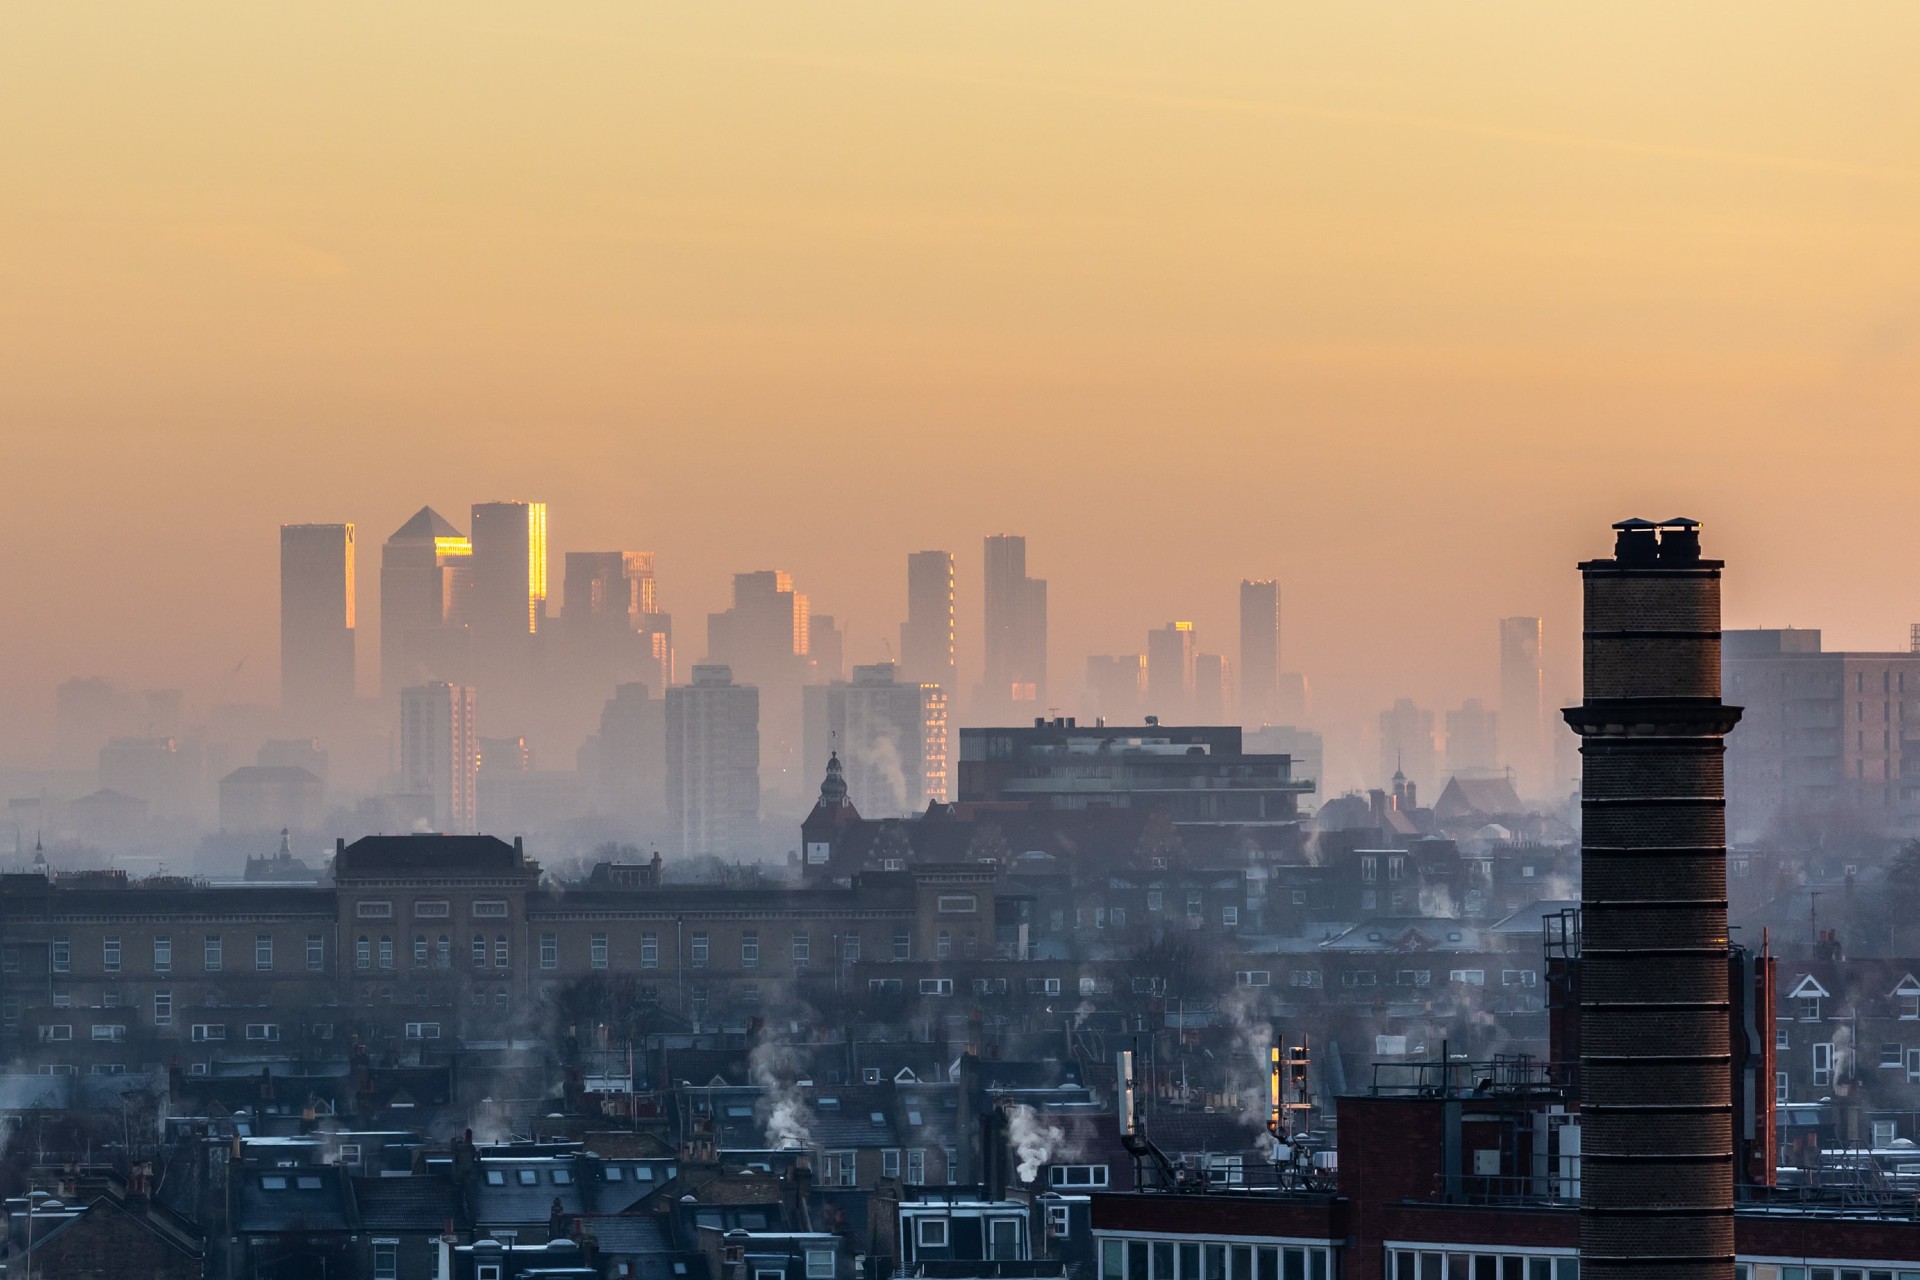 London skyline showing smoke and pollution